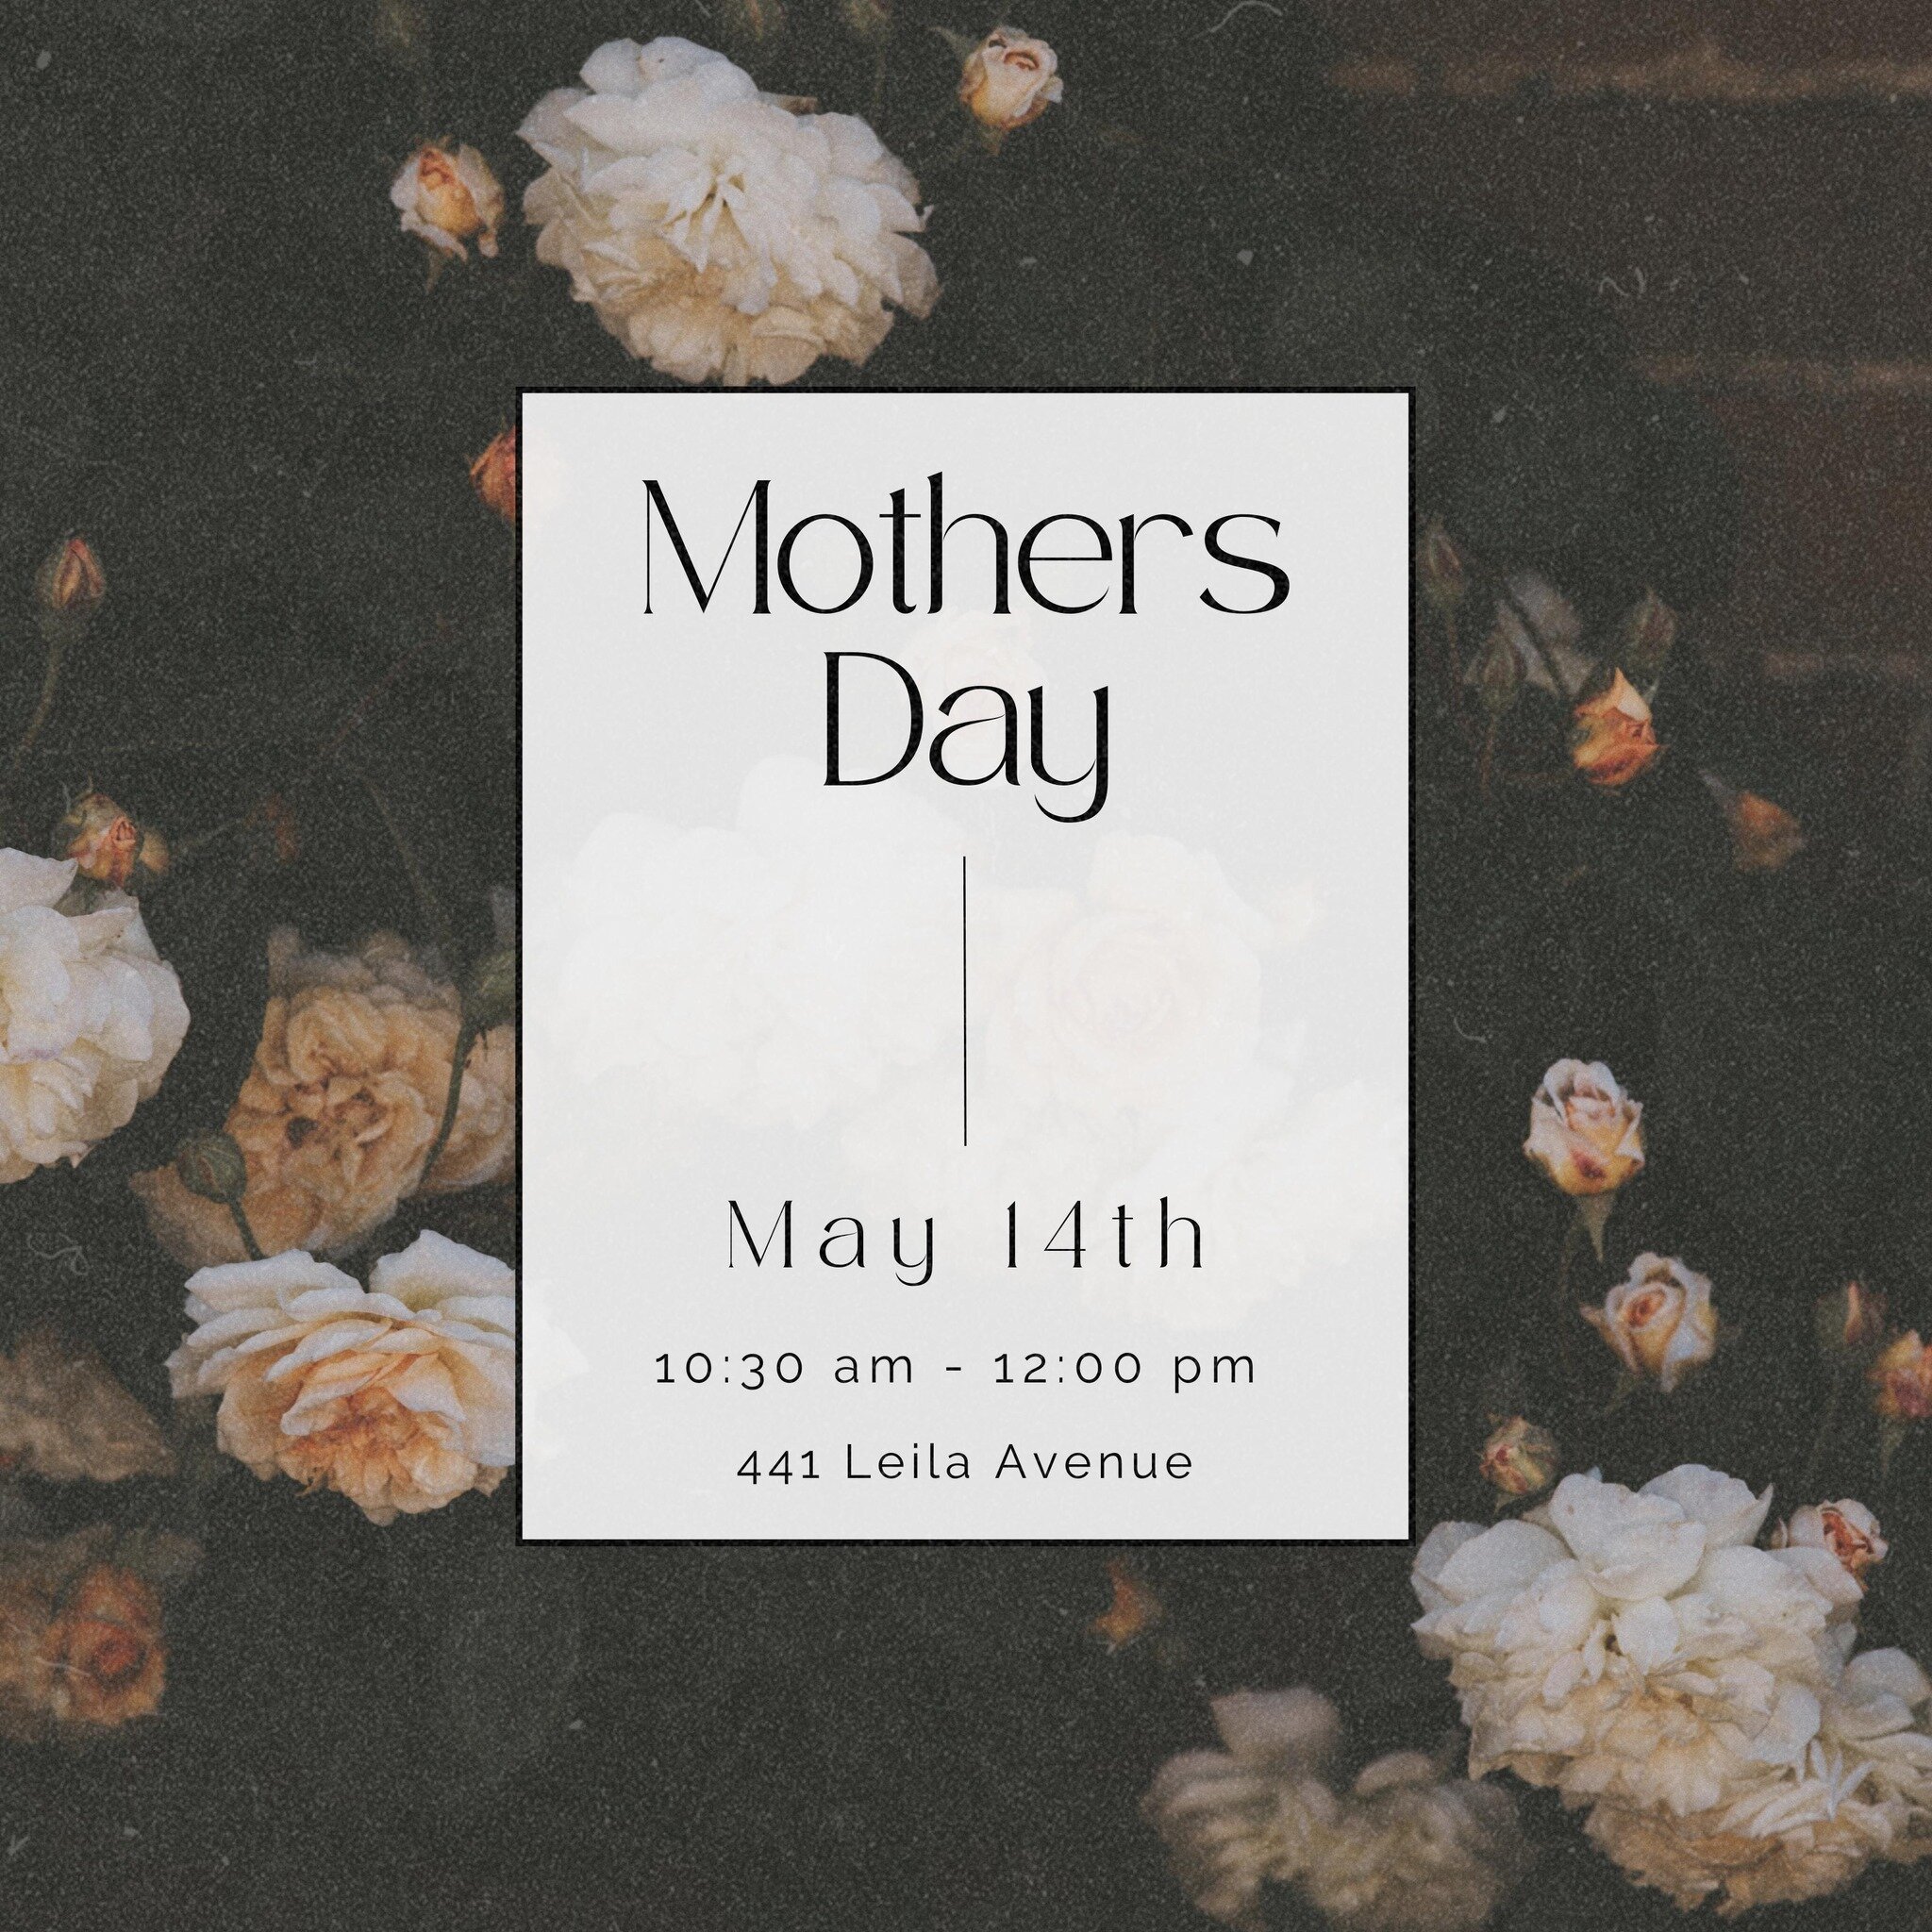 Hey there! 👋🏼 We'd love for you to join us in celebrating the amazing women in our lives this Mother's Day. We've got a special service planned, and we'll be giving a special gift to every mother in attendance to show them how much we love and appr